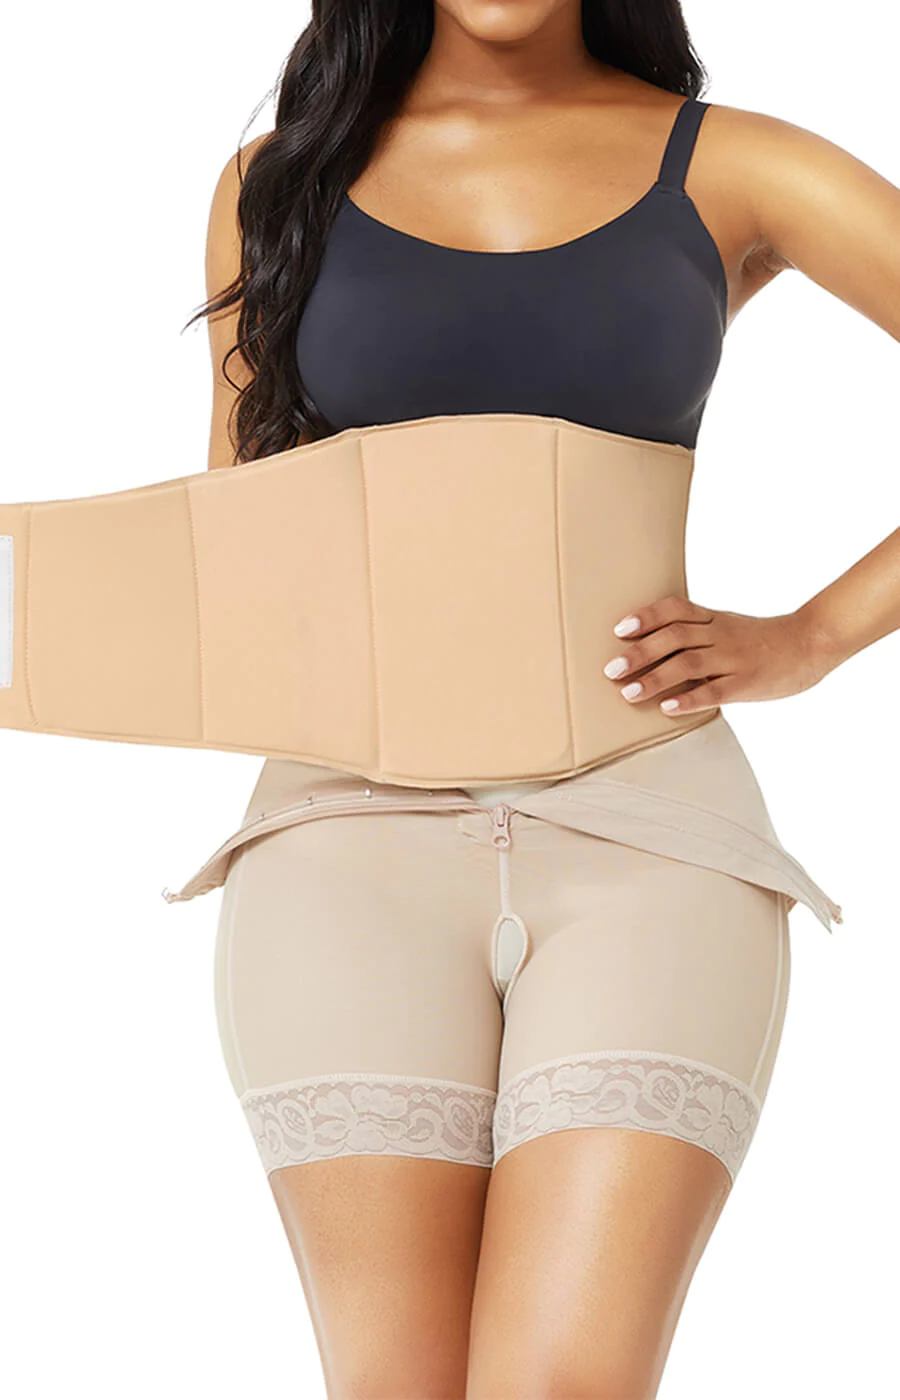 Best Shapewear For Women - Feel More Confident After Surgery